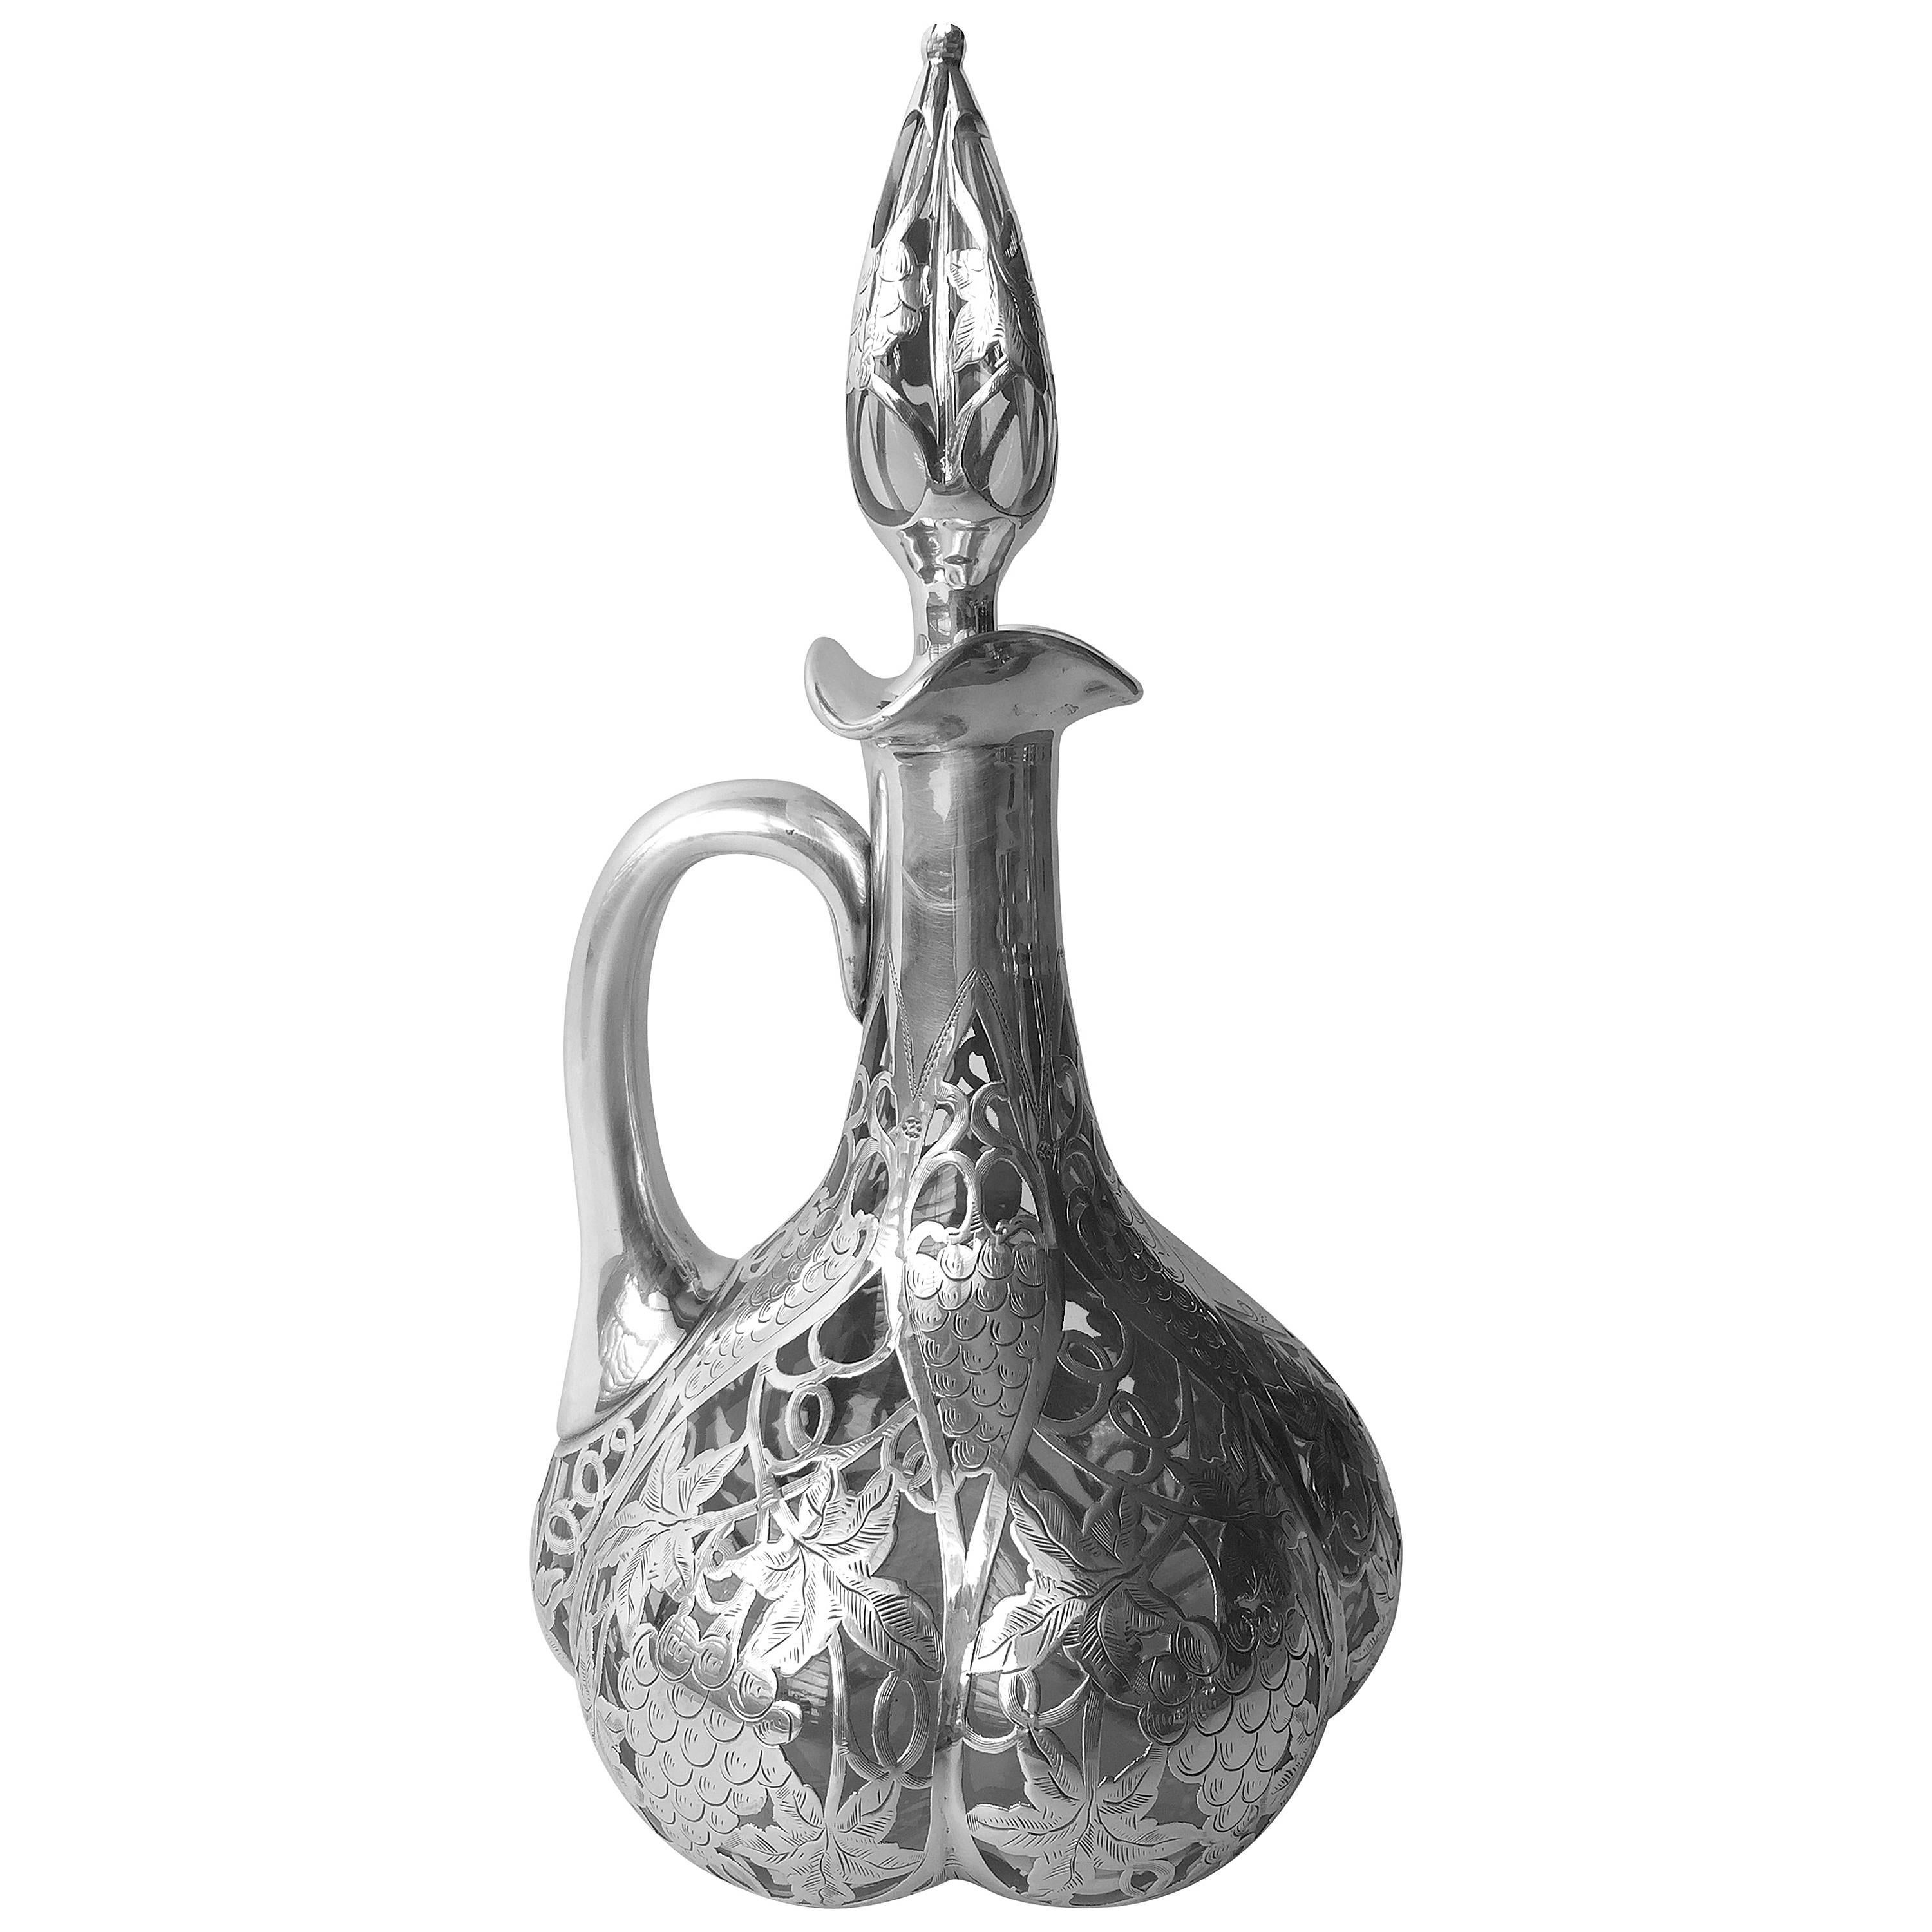 Steuben Glass Sterling Silver Overlay Decanter Blown Out Shape, circa 1900 For Sale